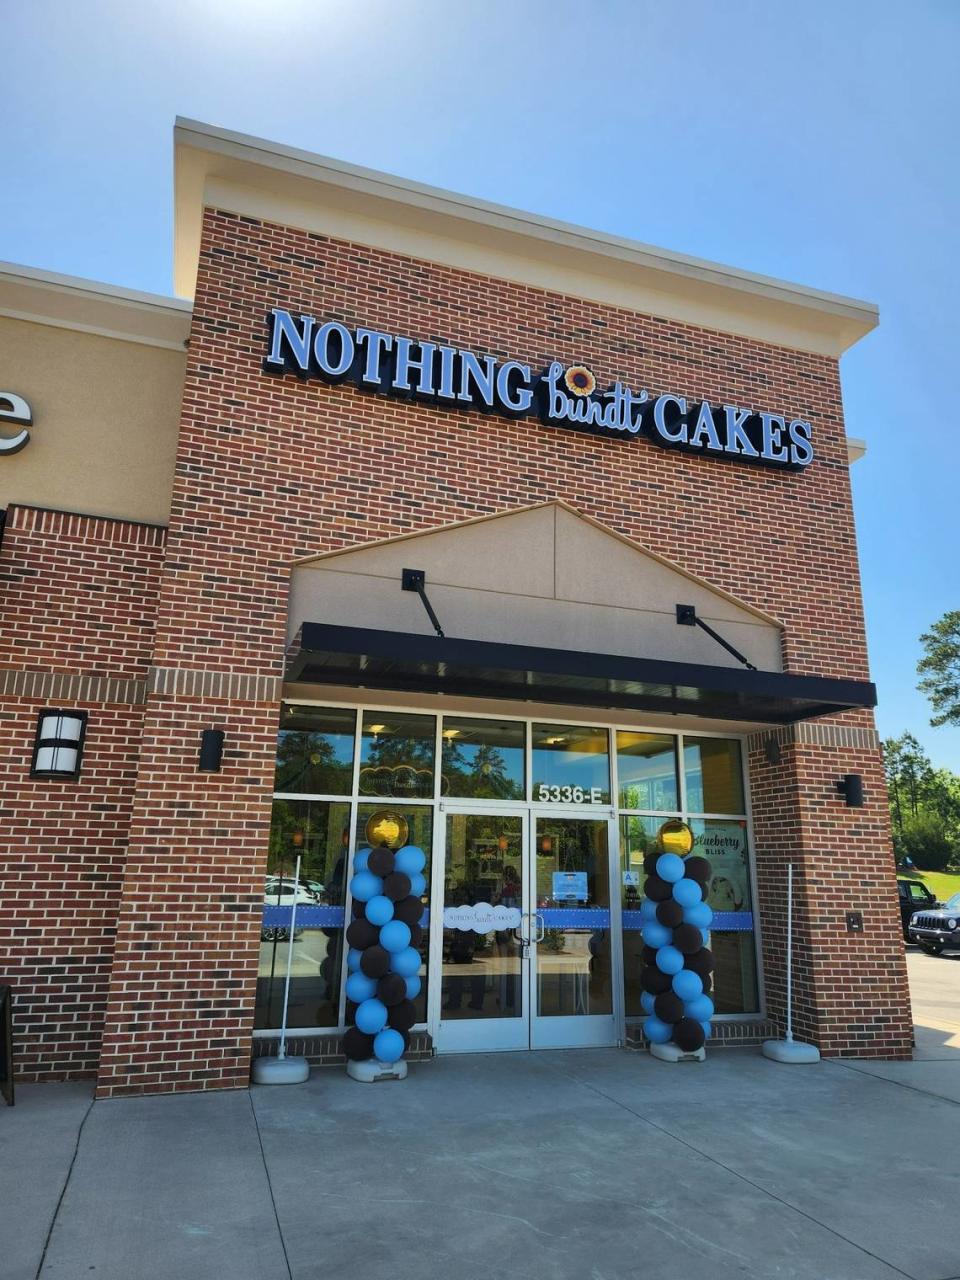 A new Nothing Bundt Cakes shop is open at 5336-E Sunset Blvd. in Lexington.